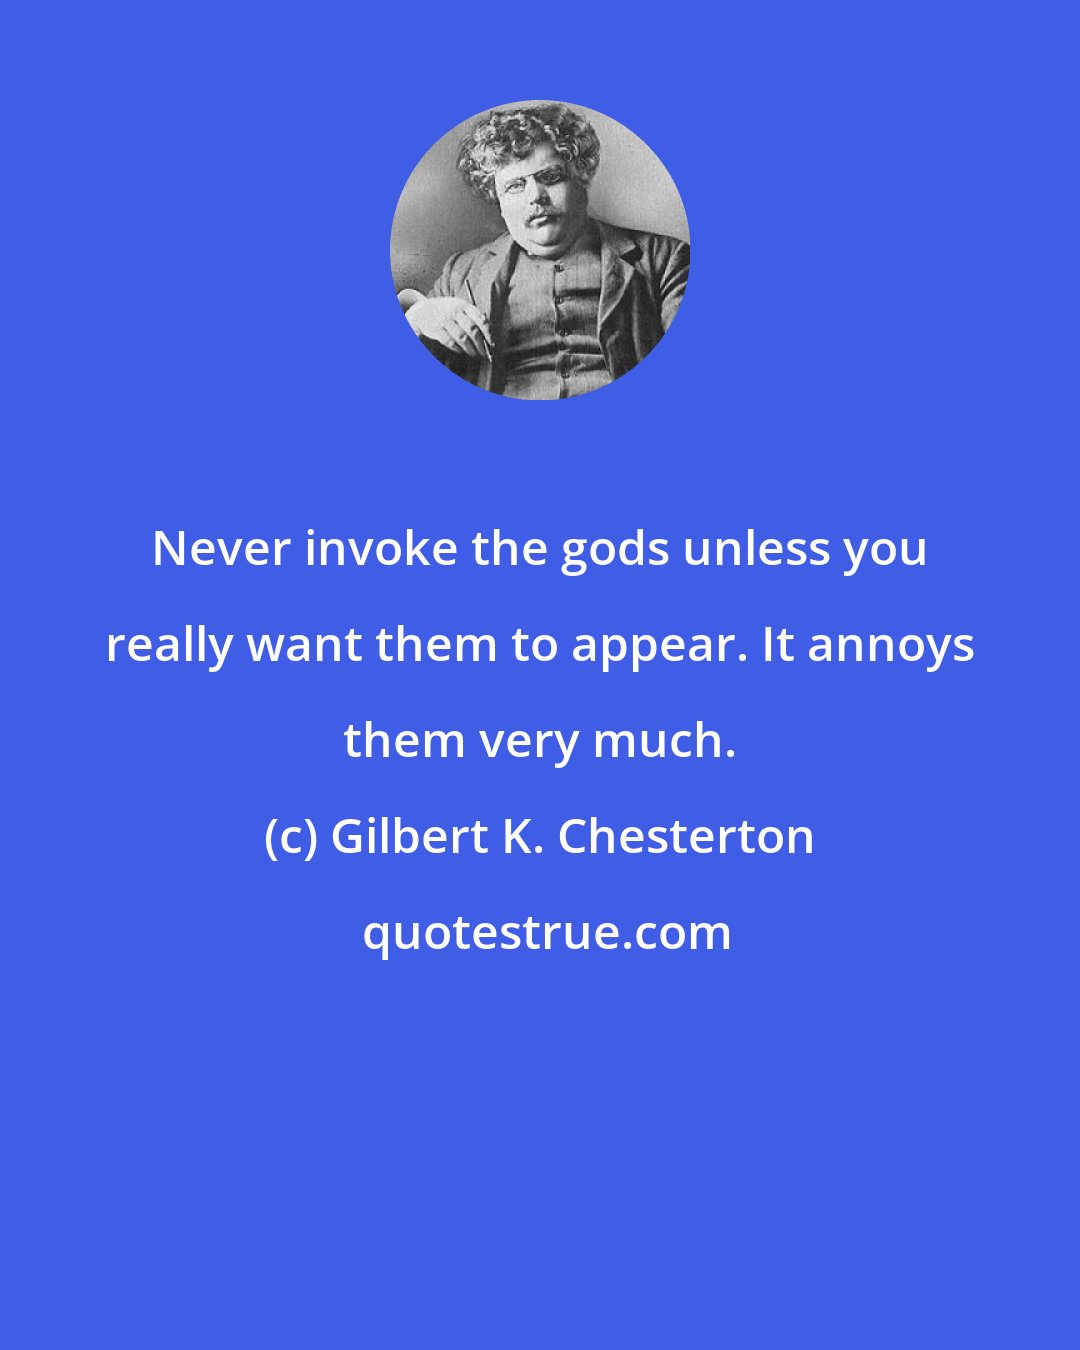 Gilbert K. Chesterton: Never invoke the gods unless you really want them to appear. It annoys them very much.